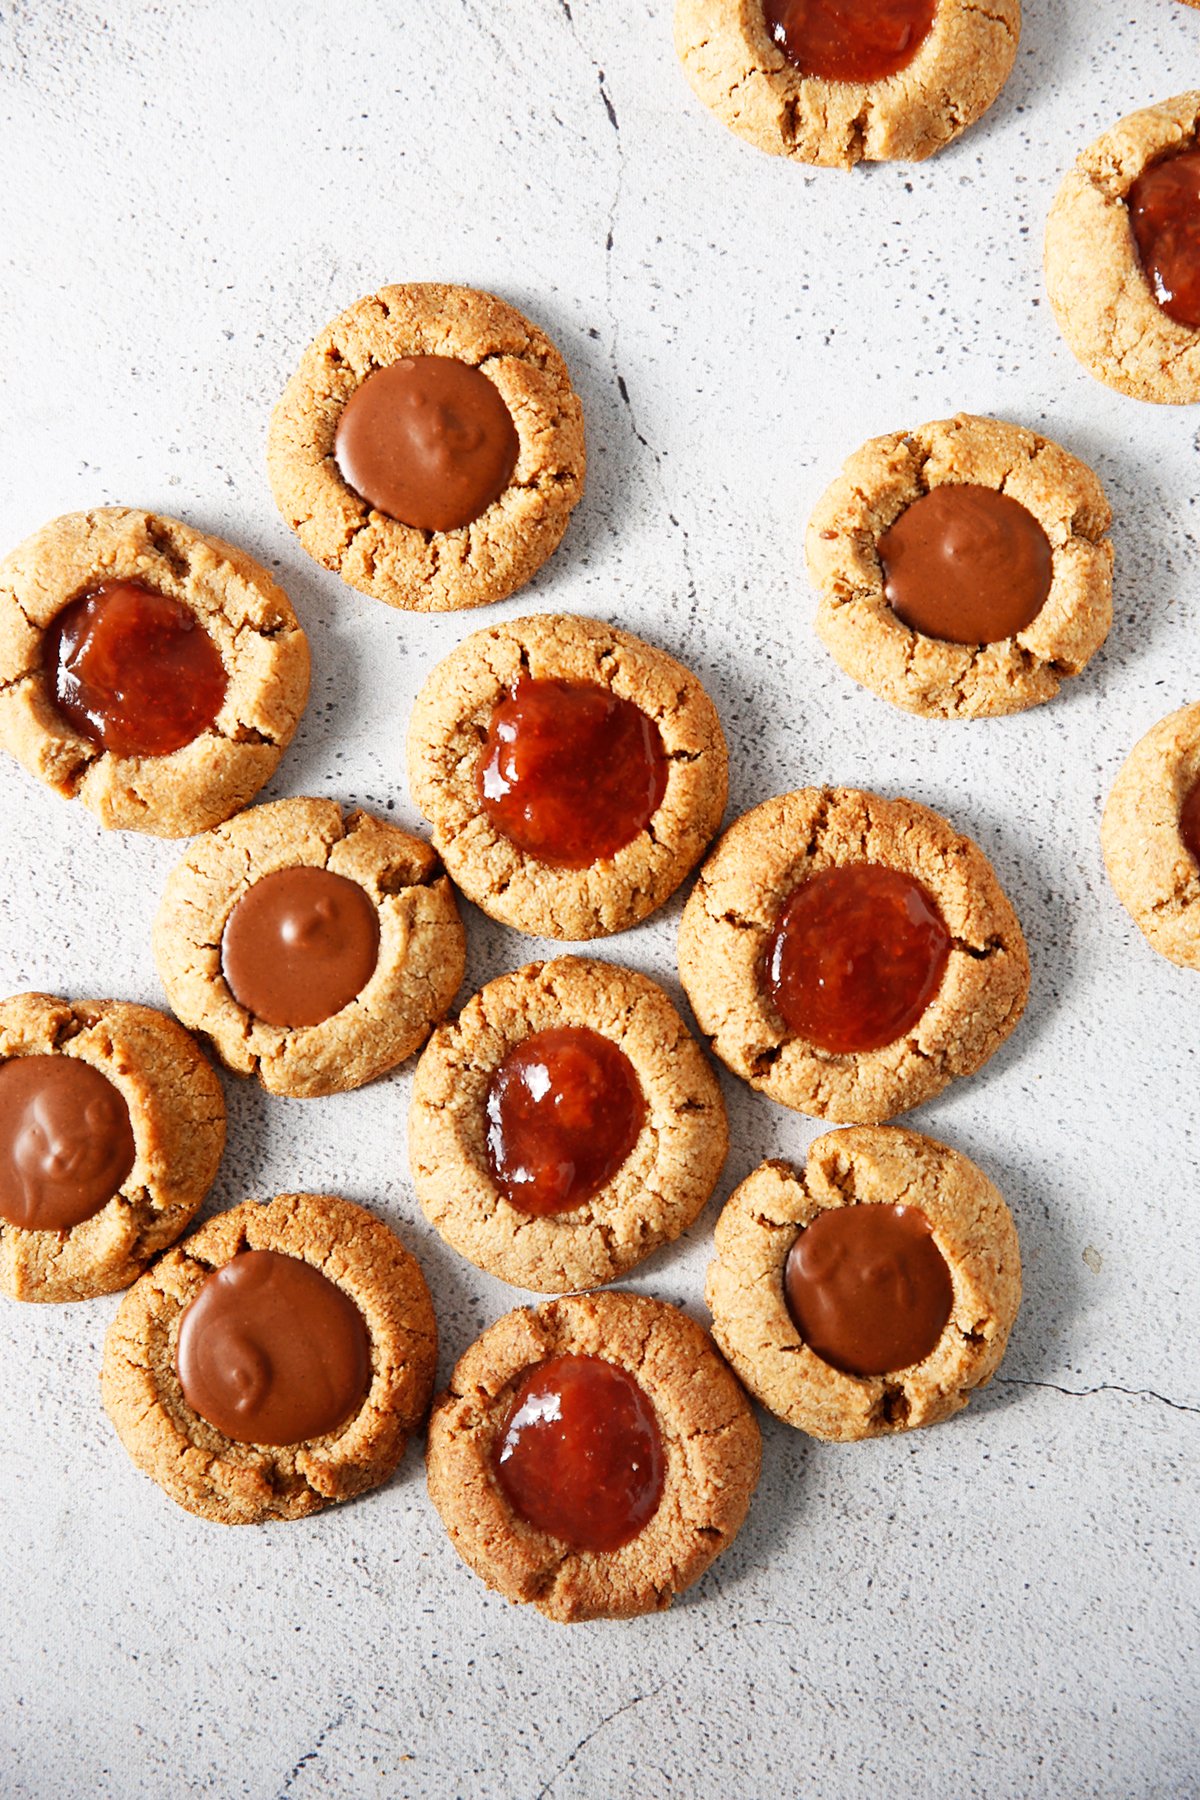 Gluten free thumbprint cookies filled with Nutella and jam.